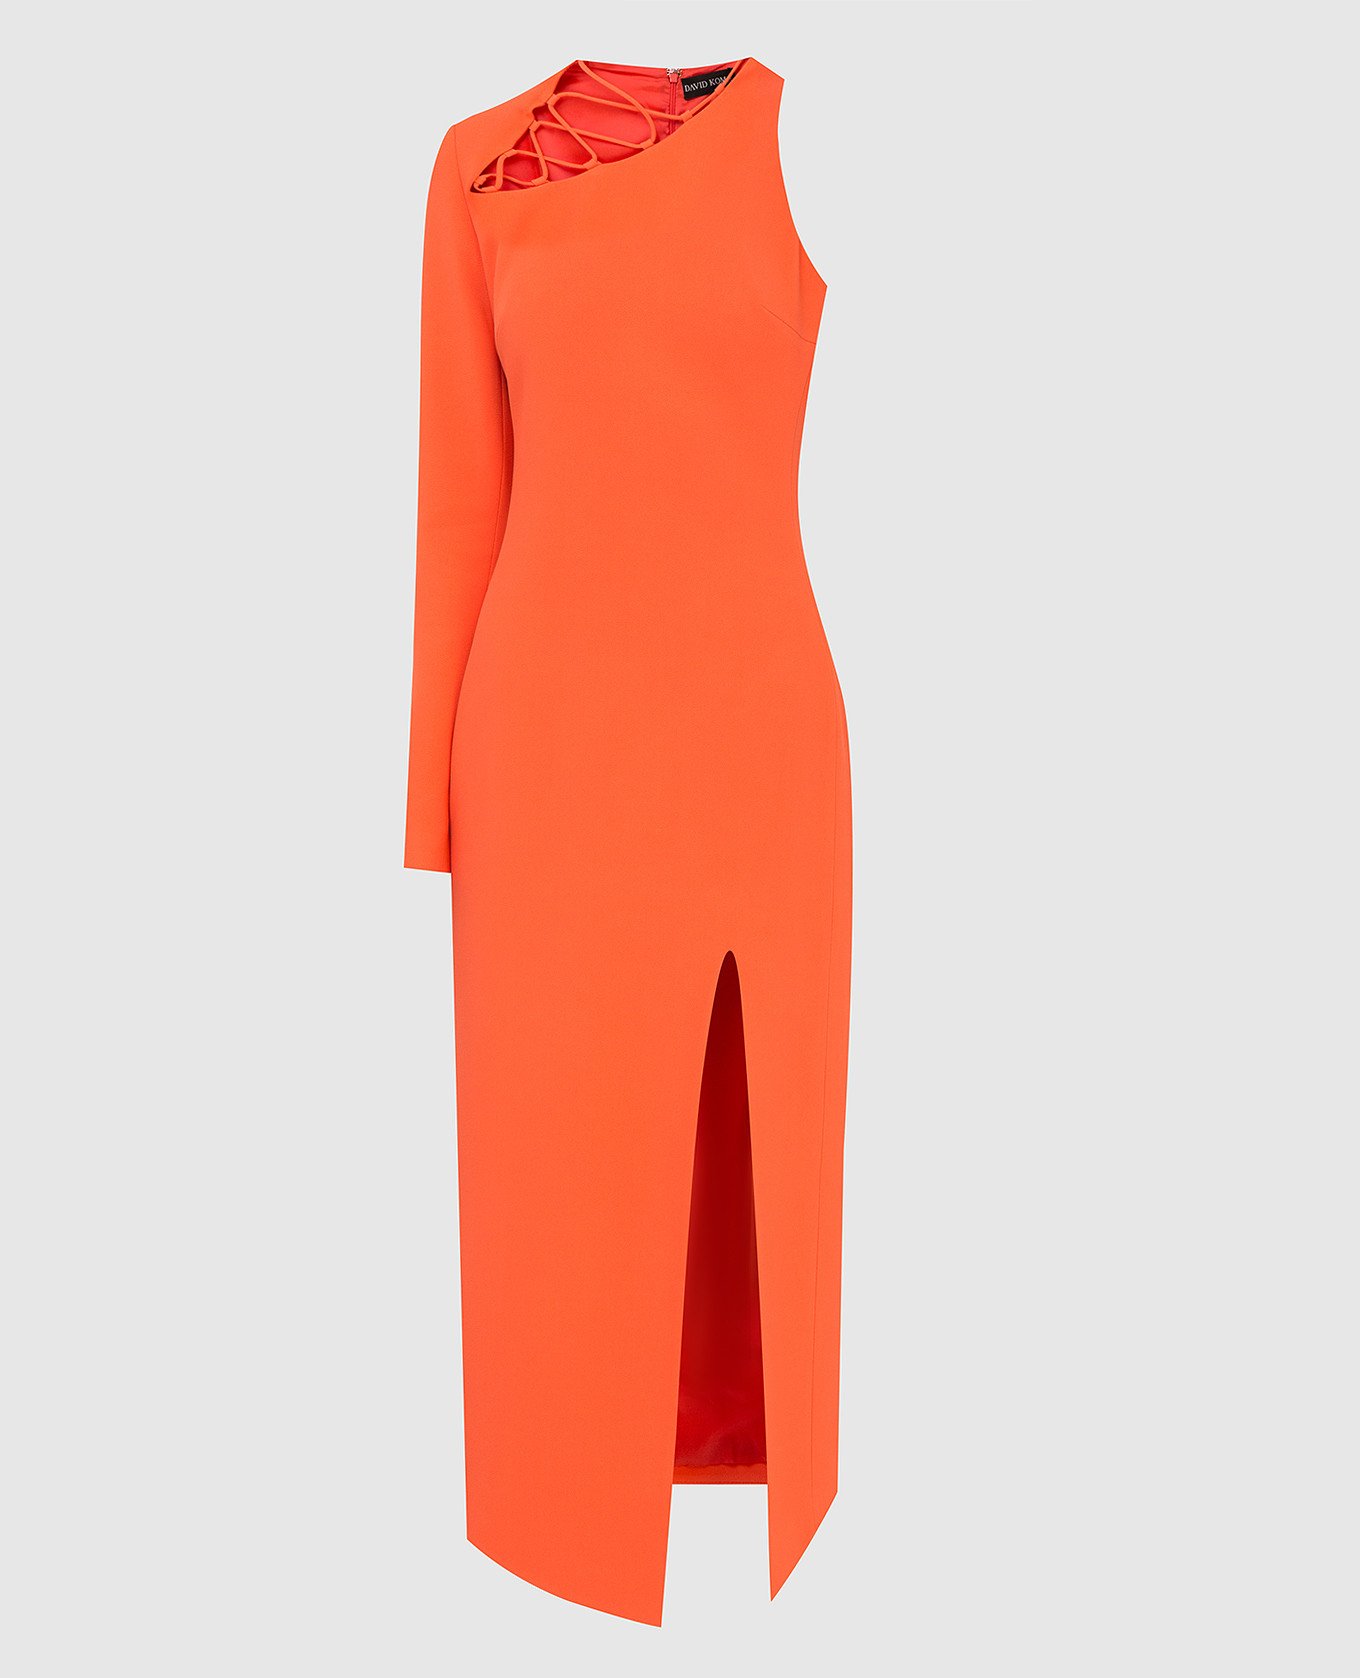 Orange dress with a slit and asymmetry